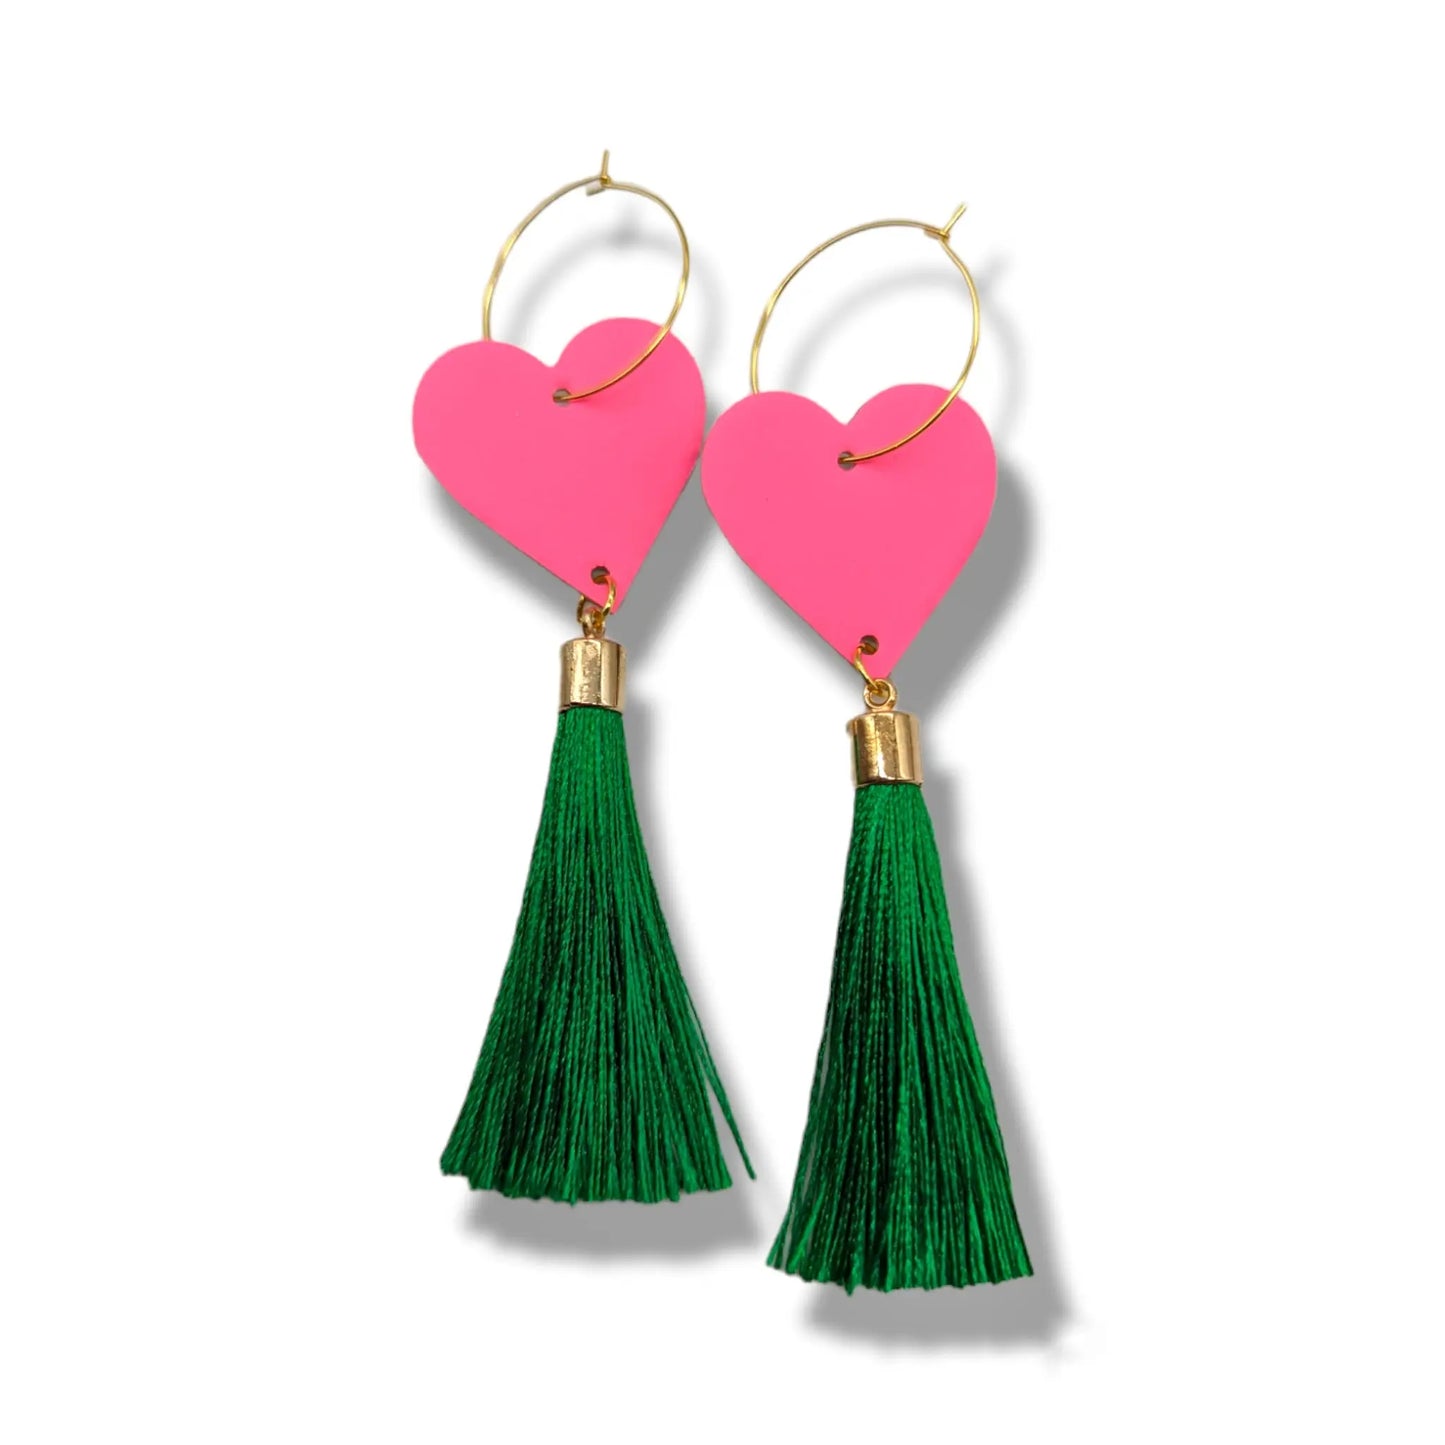 Neon pink and gold green tassel earrings - Trend Tonic 